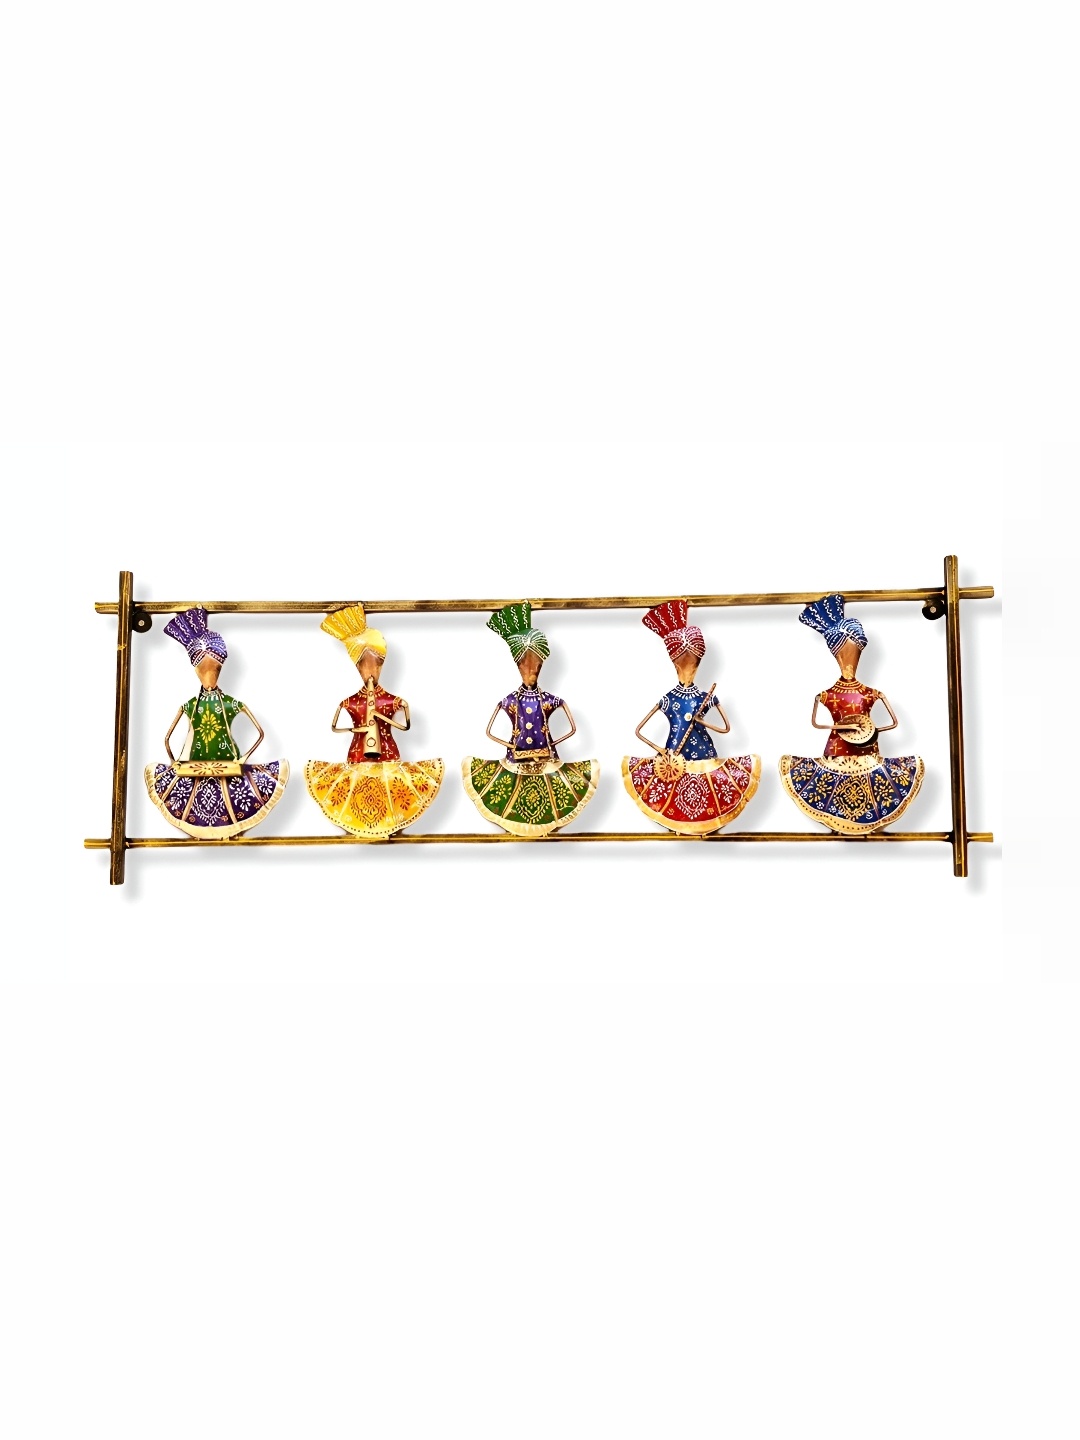 

PRANJALS HOUSE Yellow & Blue Antique 5 Musician Doll Metal Hangings Wall Decor, Gold